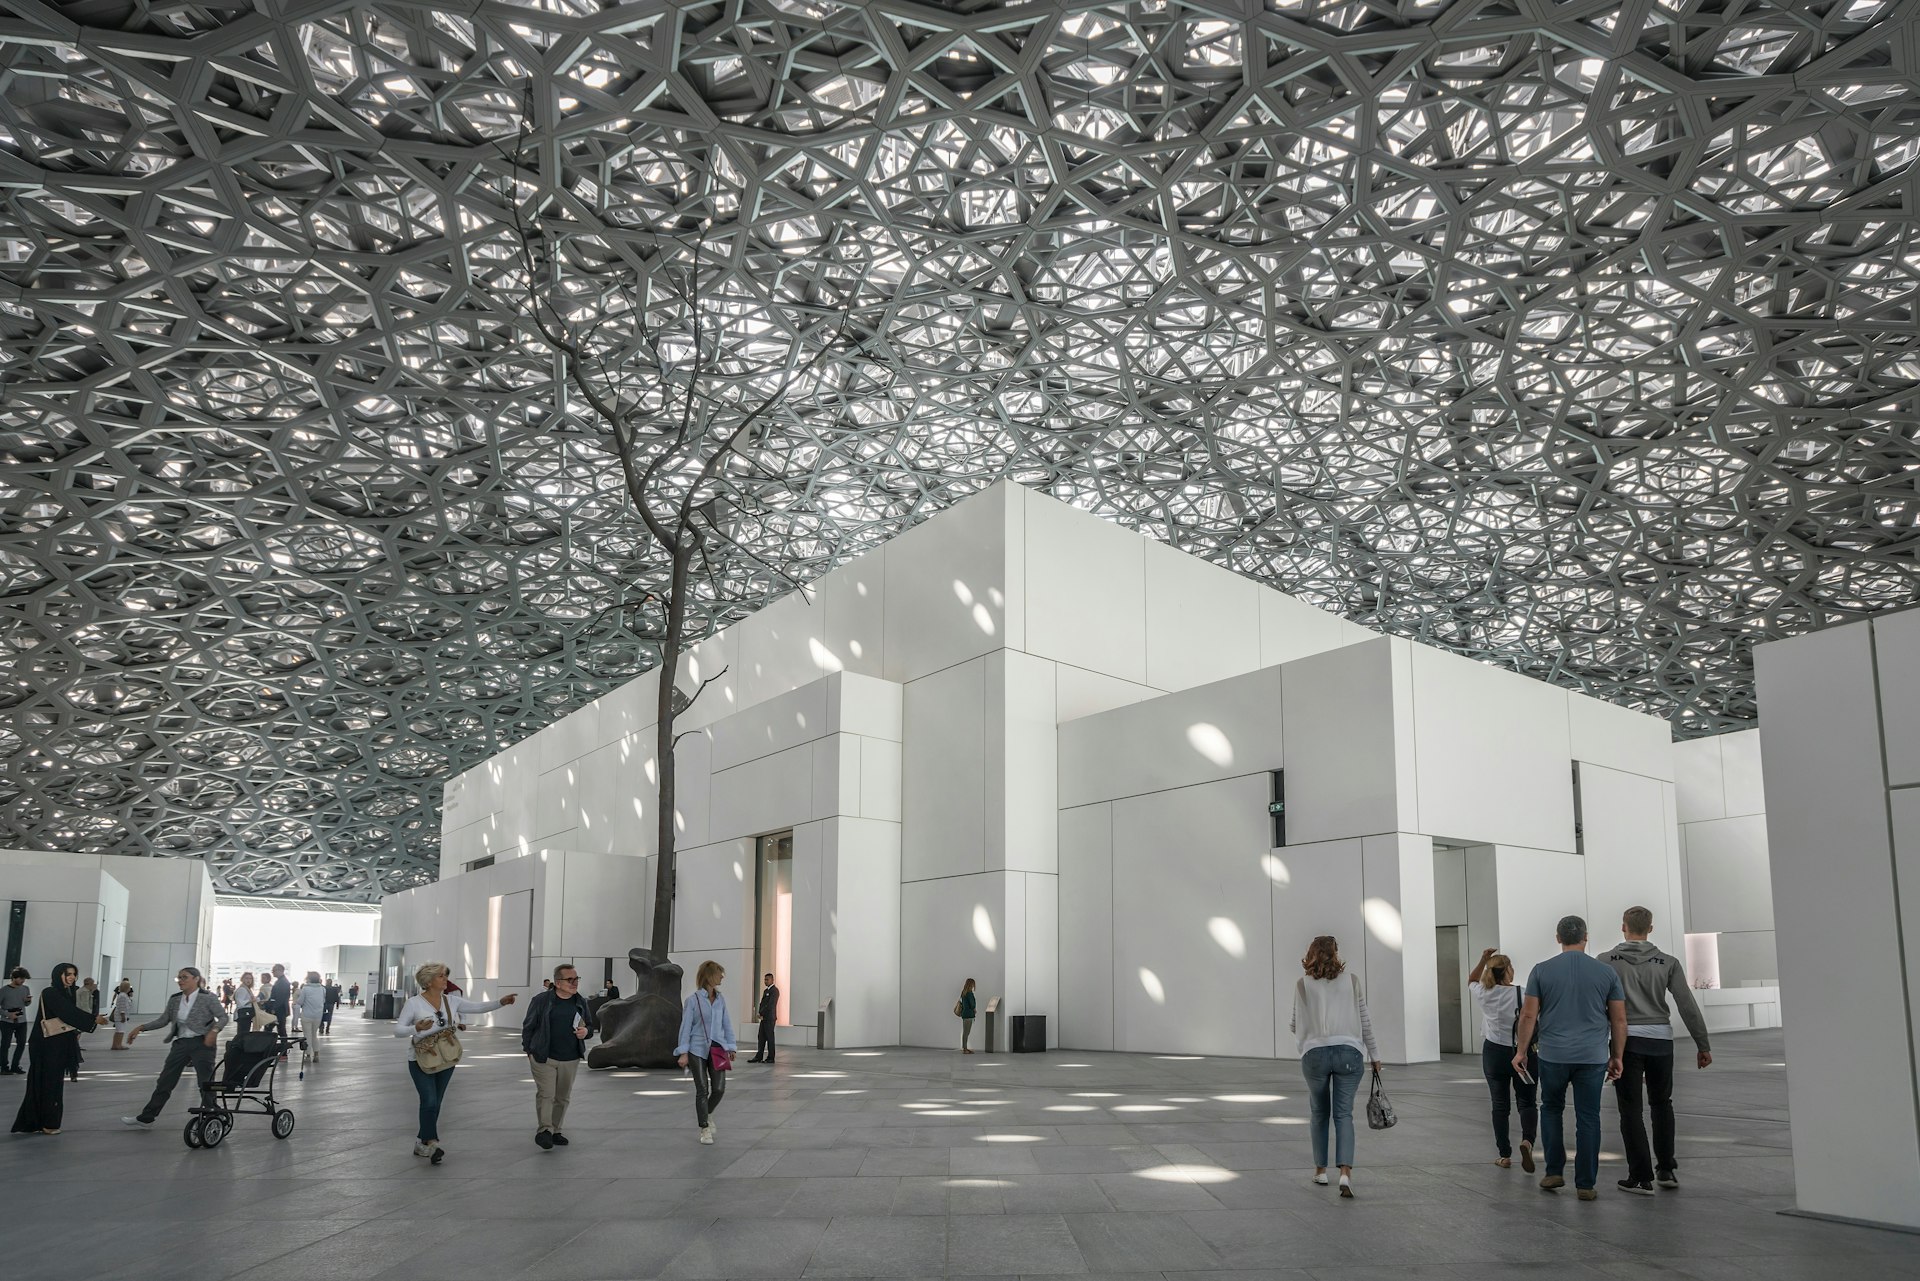 Light pours in through the steel dome of the Louvre Abu Dhabi, Abu Dhabi, United Arab Emirates